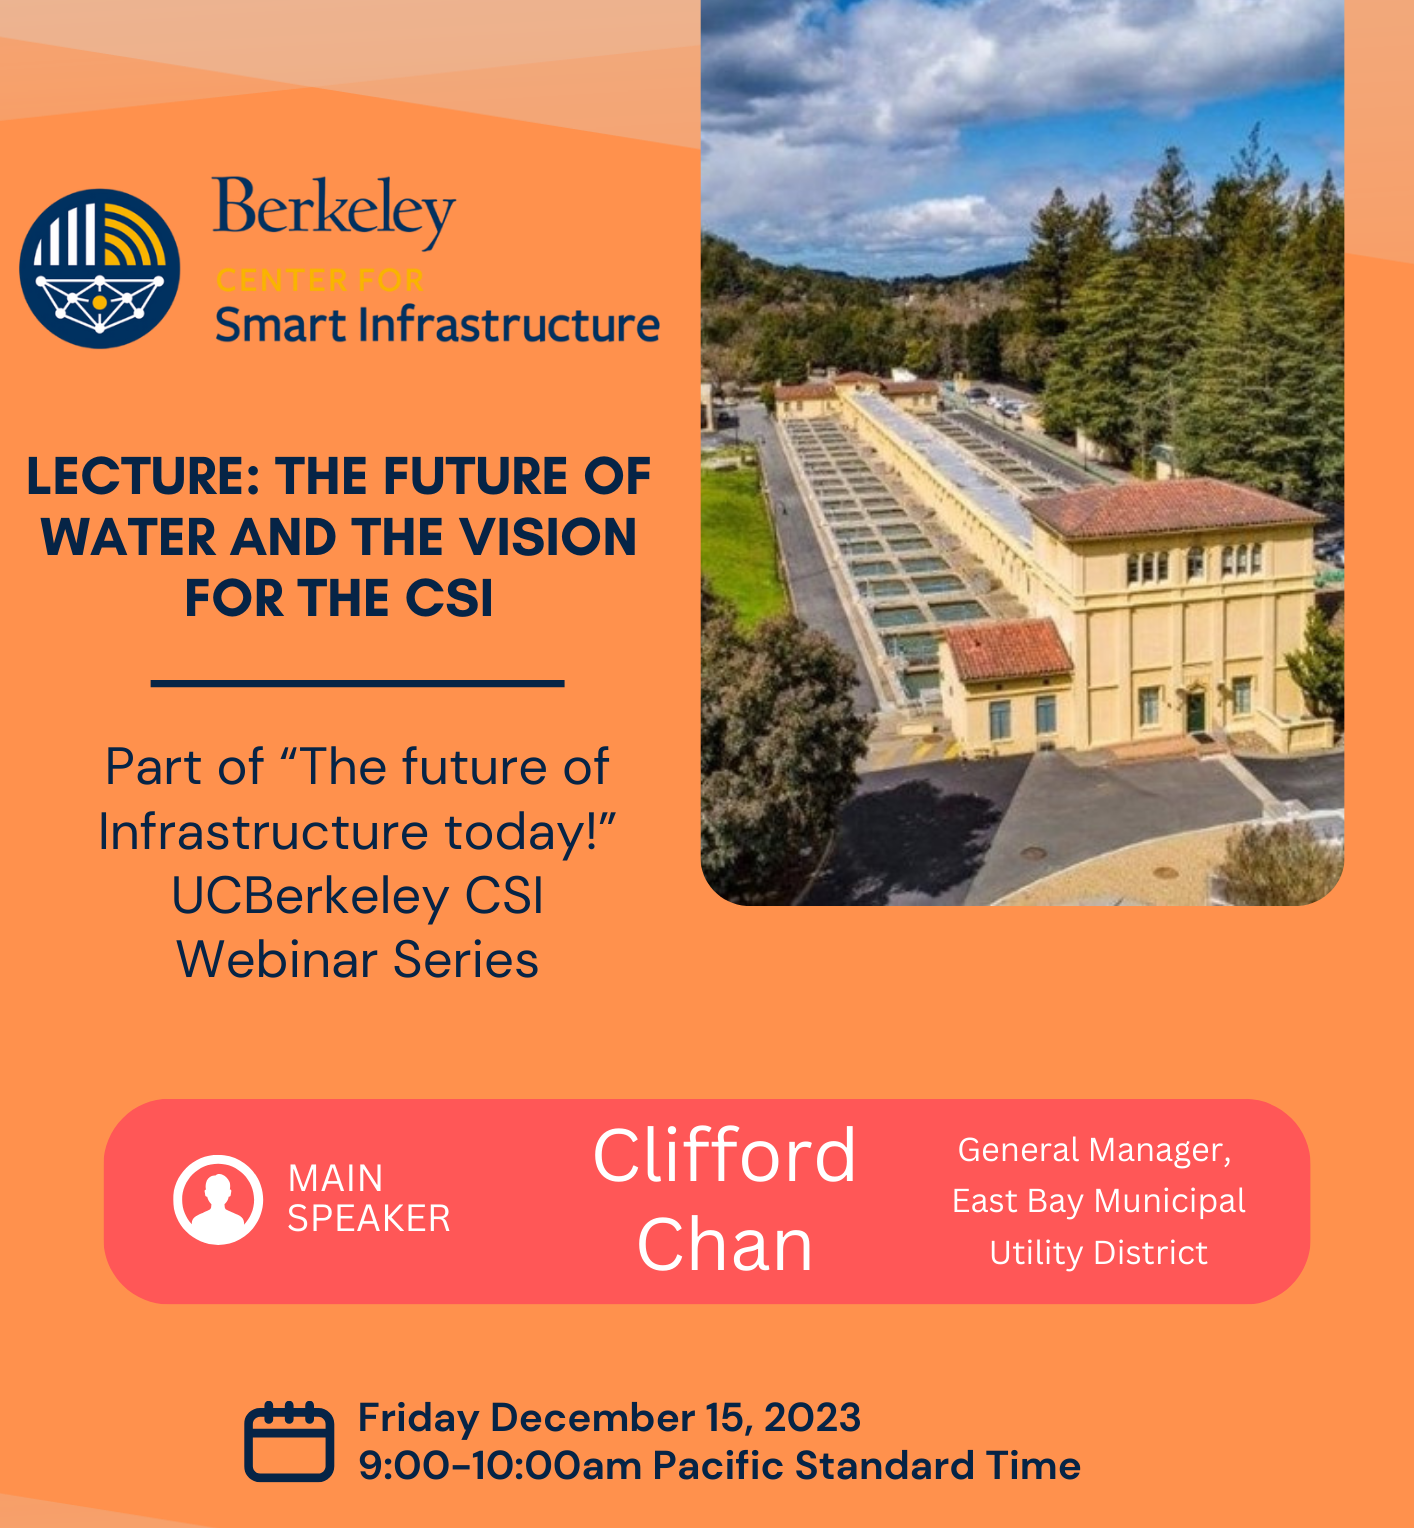 "The Future of Water and the Vision for the CSI", part of "The future of Infrastructure today!" webinar series